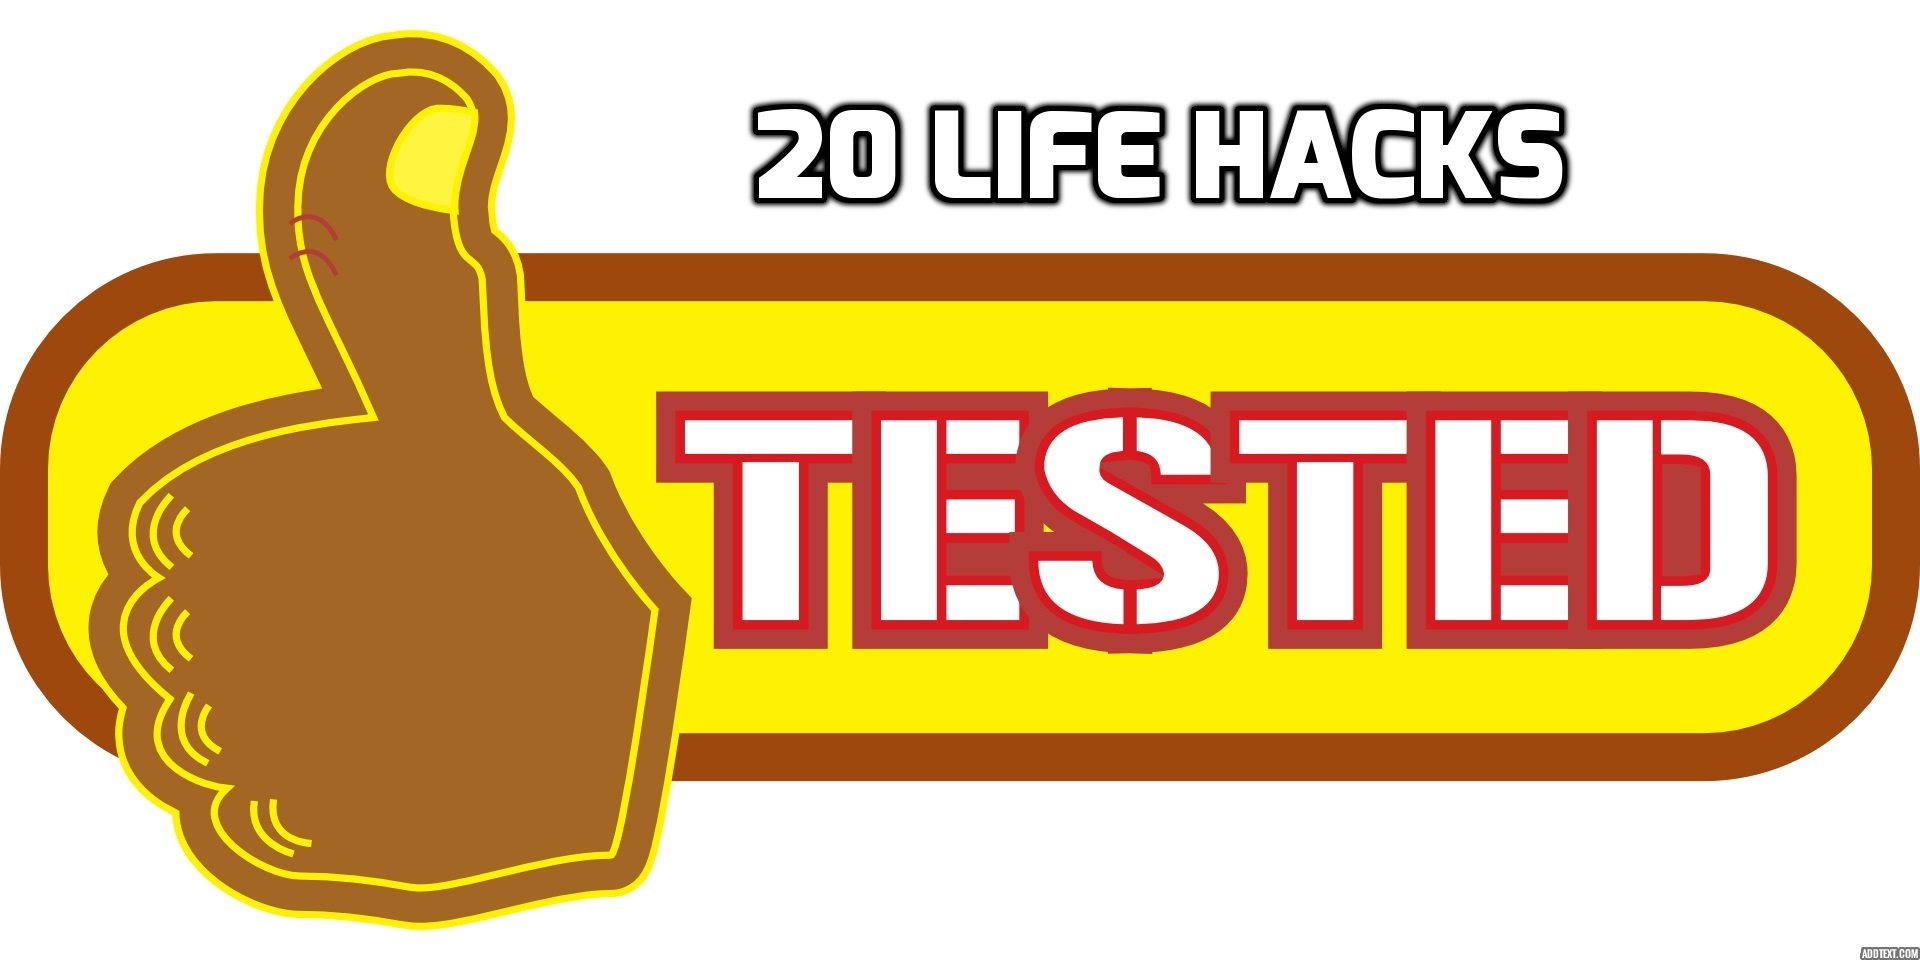 20 Popular Life Hacks From the Internet Debunked (or Verified)